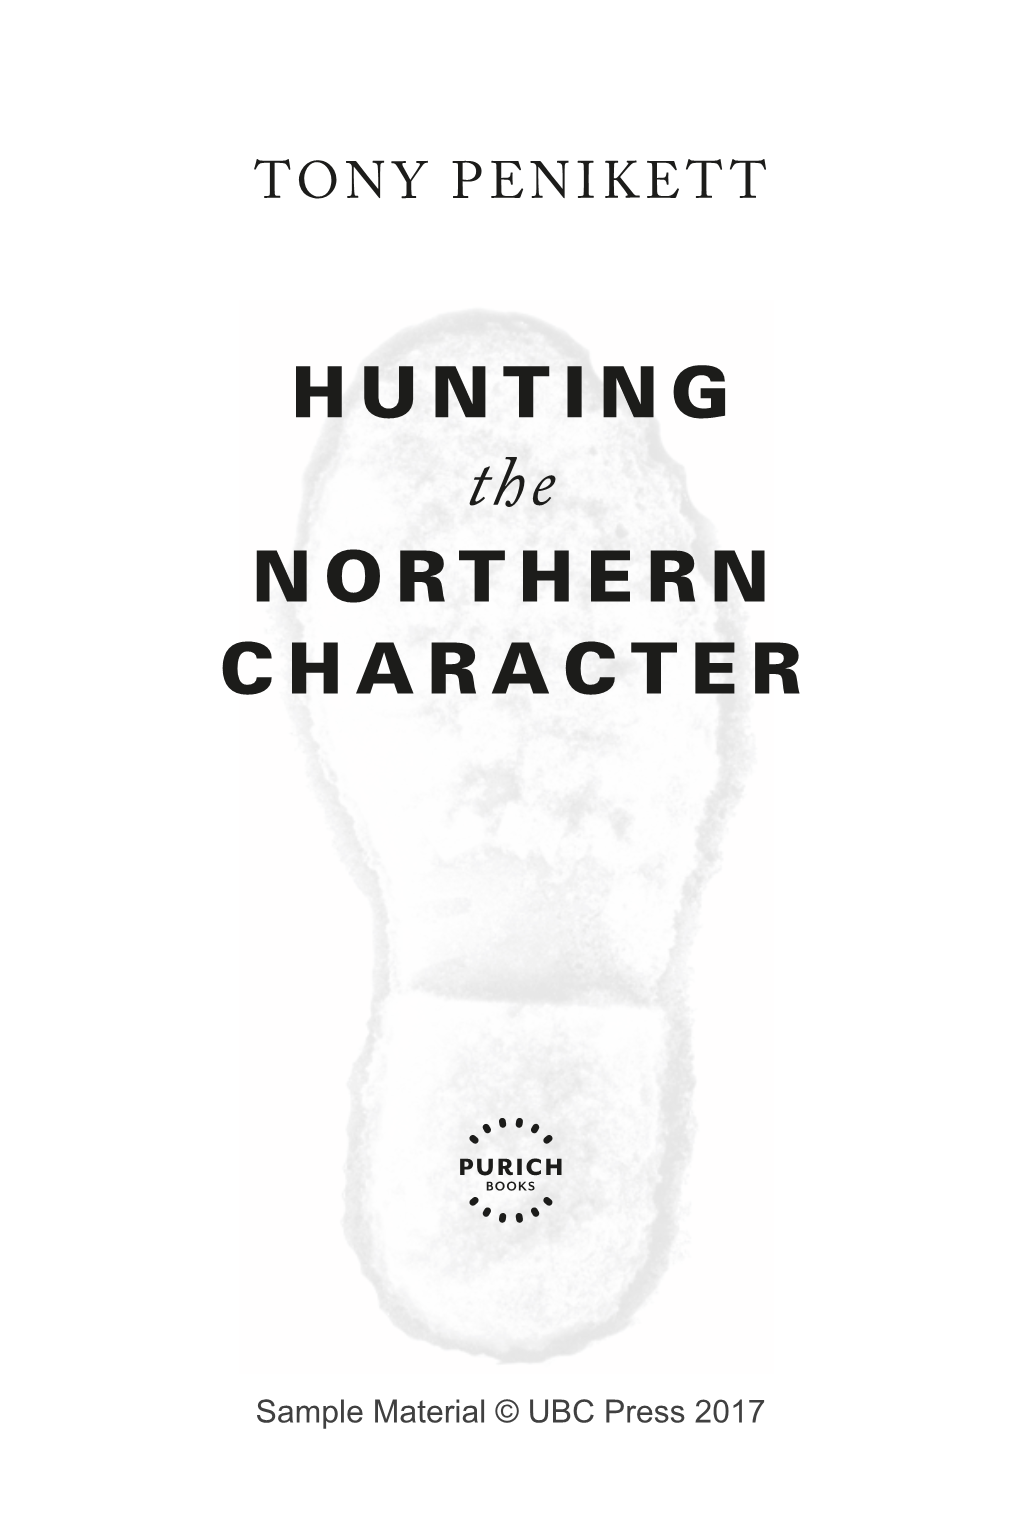 HUNTING the NORTHERN CHARACTER